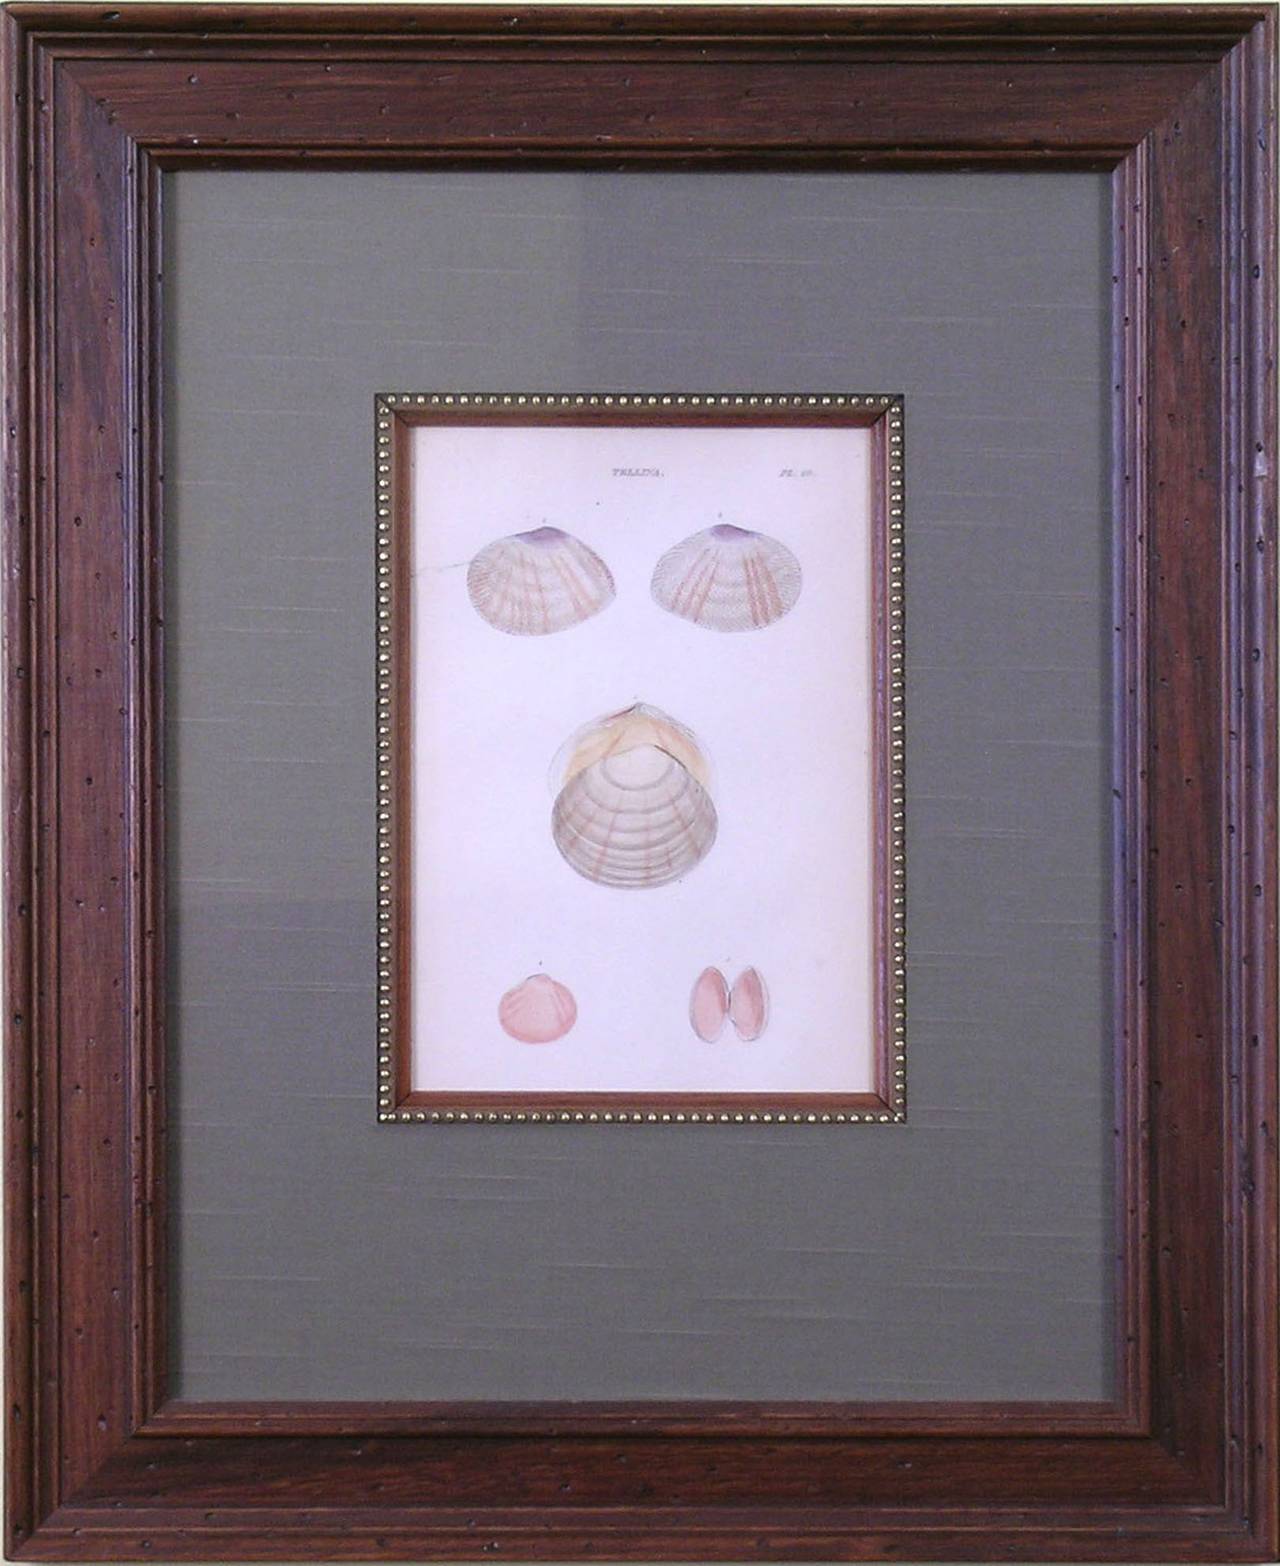 Tellina.  Plate 40 (Shells) - Sculpture by William Wood (b.1774)